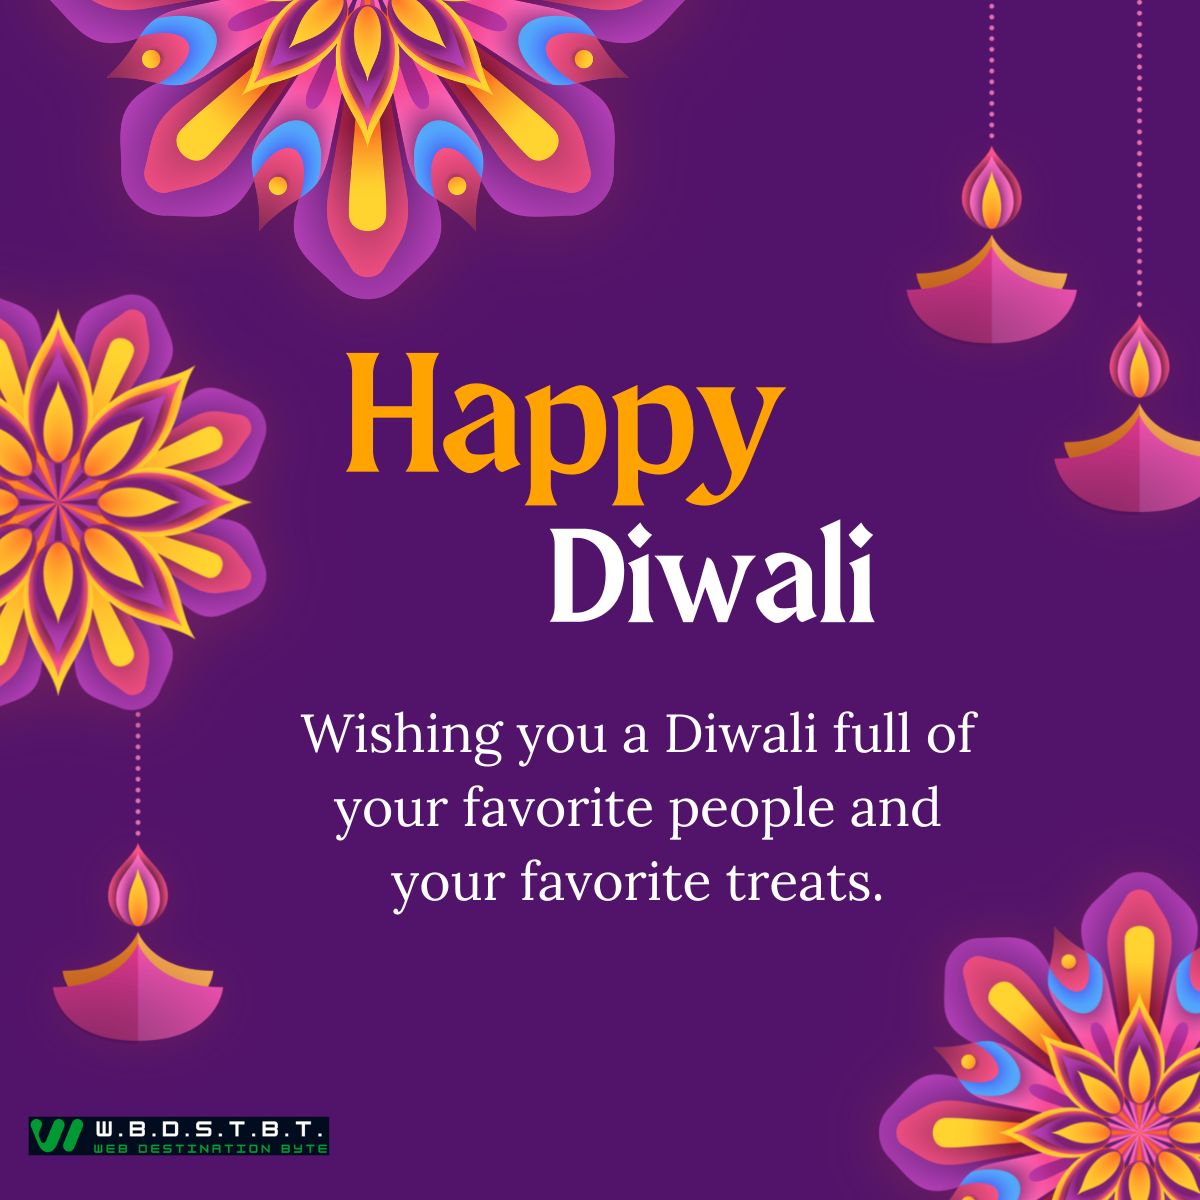 Wishing you a Diwali full of your favorite people and your favorite treats.